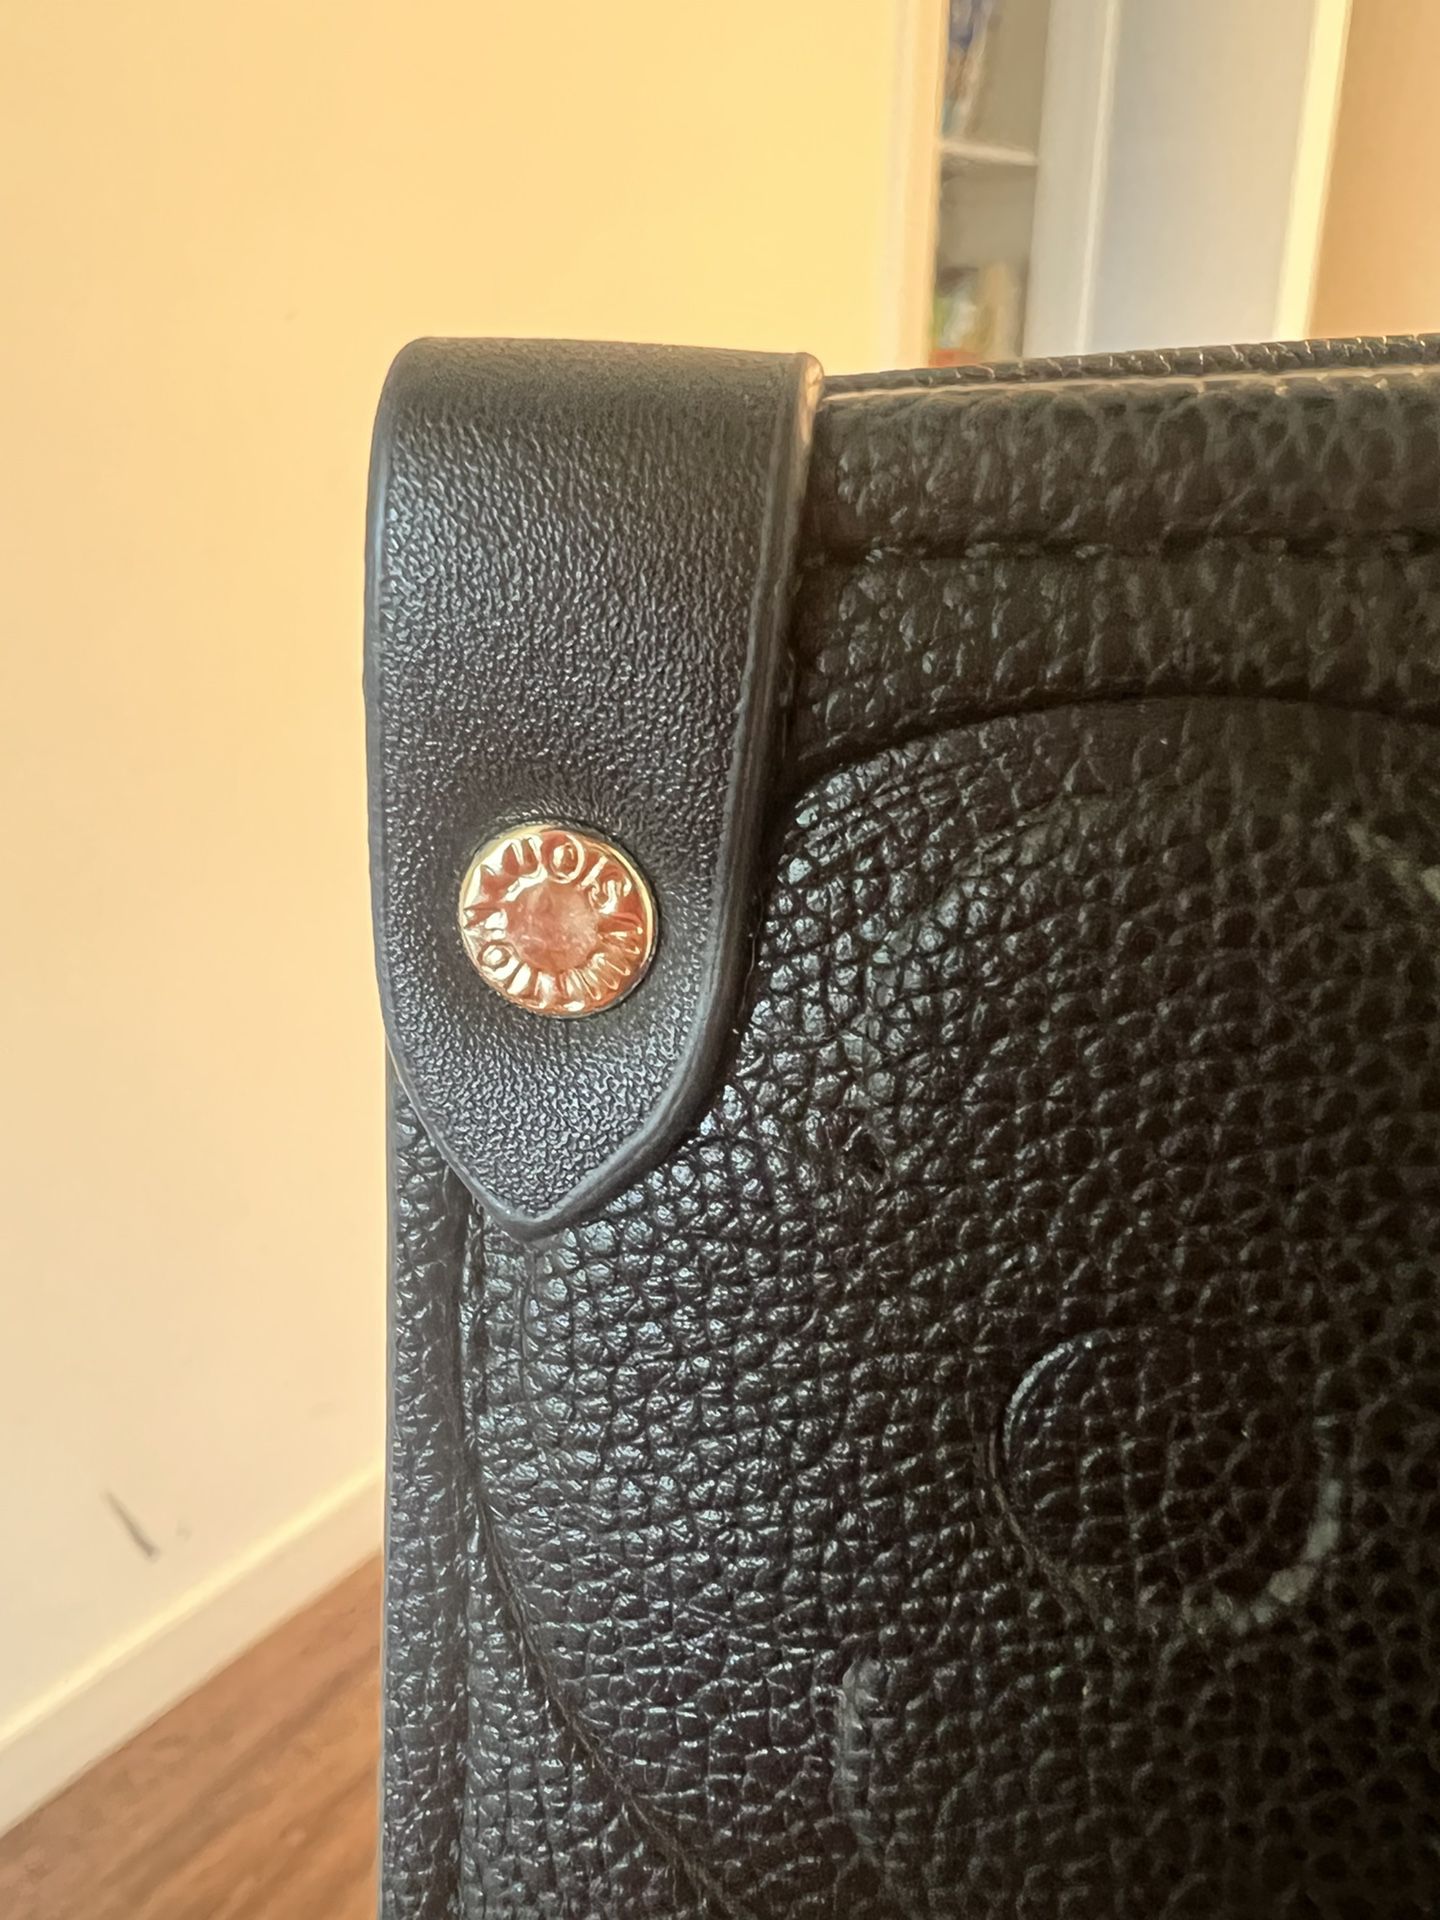 Black LV On-The-Go Tote for Sale in Anaheim, CA - OfferUp